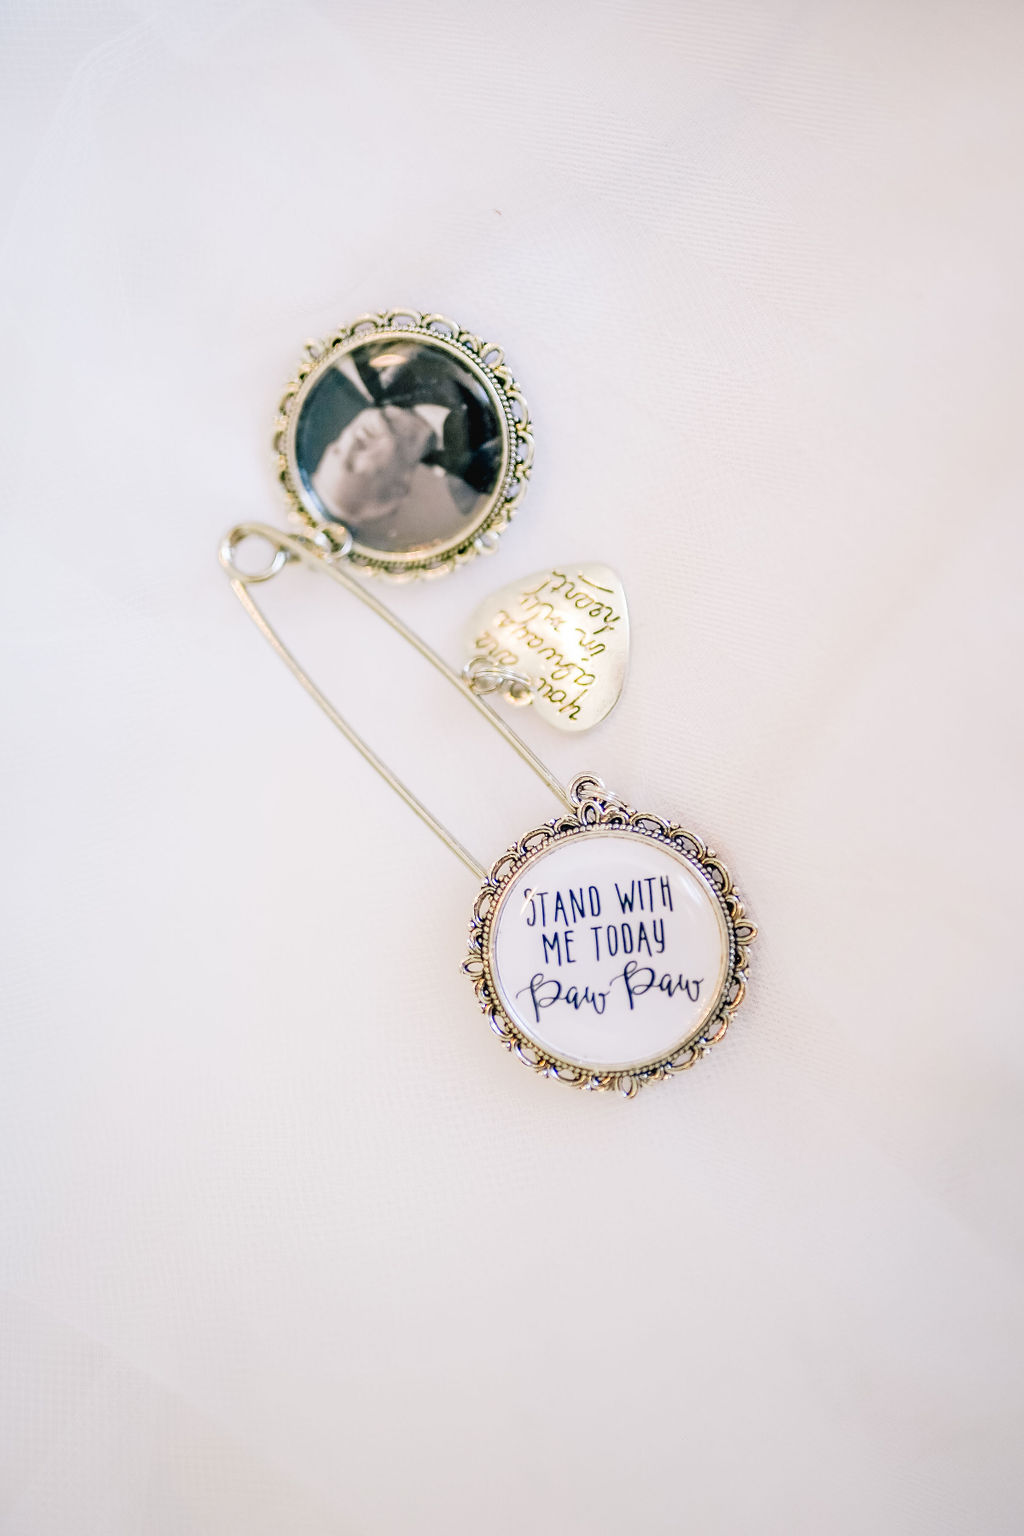 sentimental piece for bride to wear hidden on her wedding day with a pin attached to a pendant with a picture of her grandfather